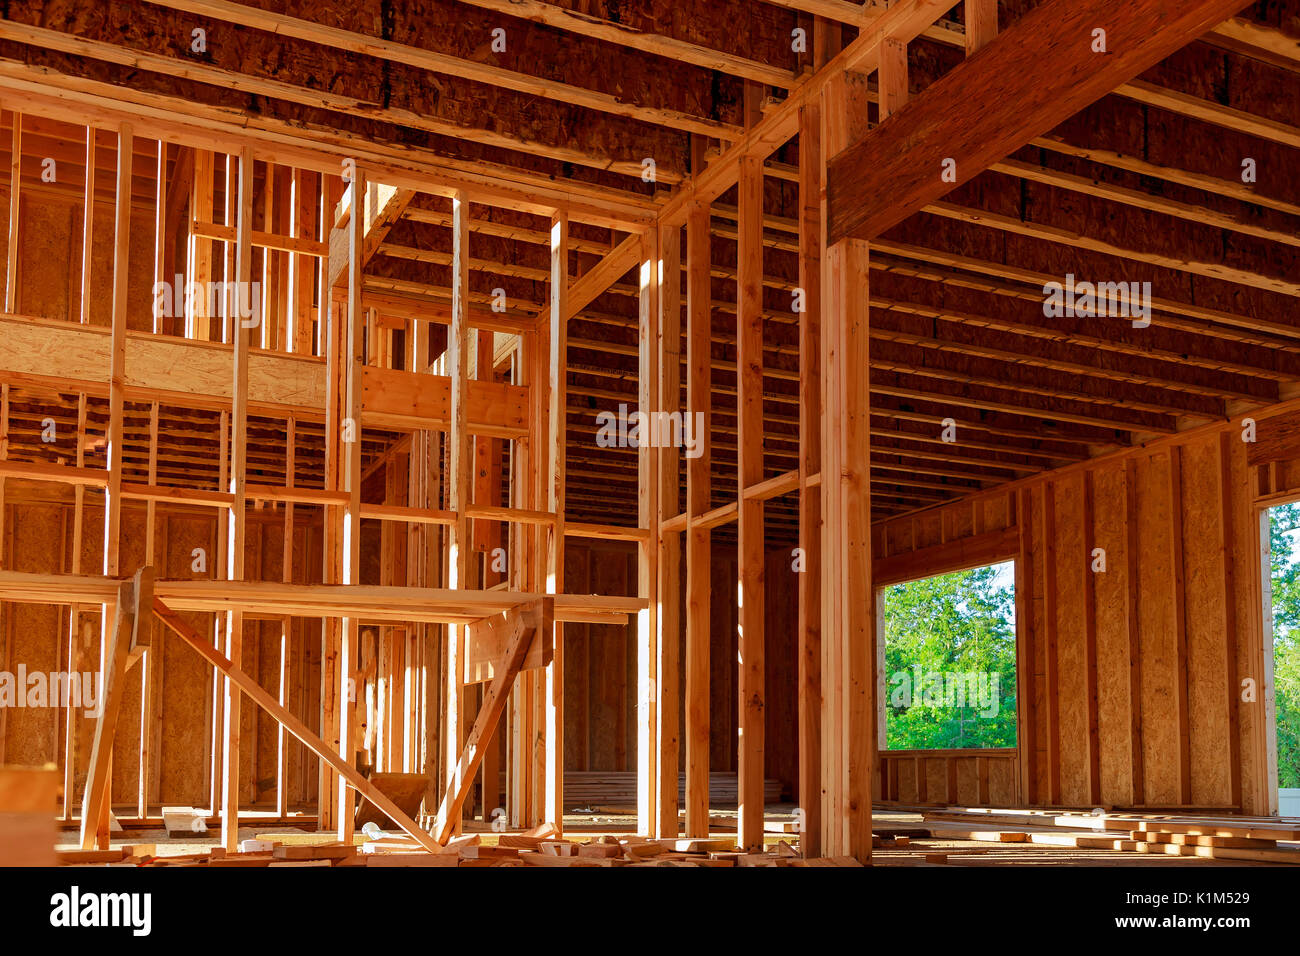 New construction of a home in a subdivision wood framework of new residential home Stock Photo